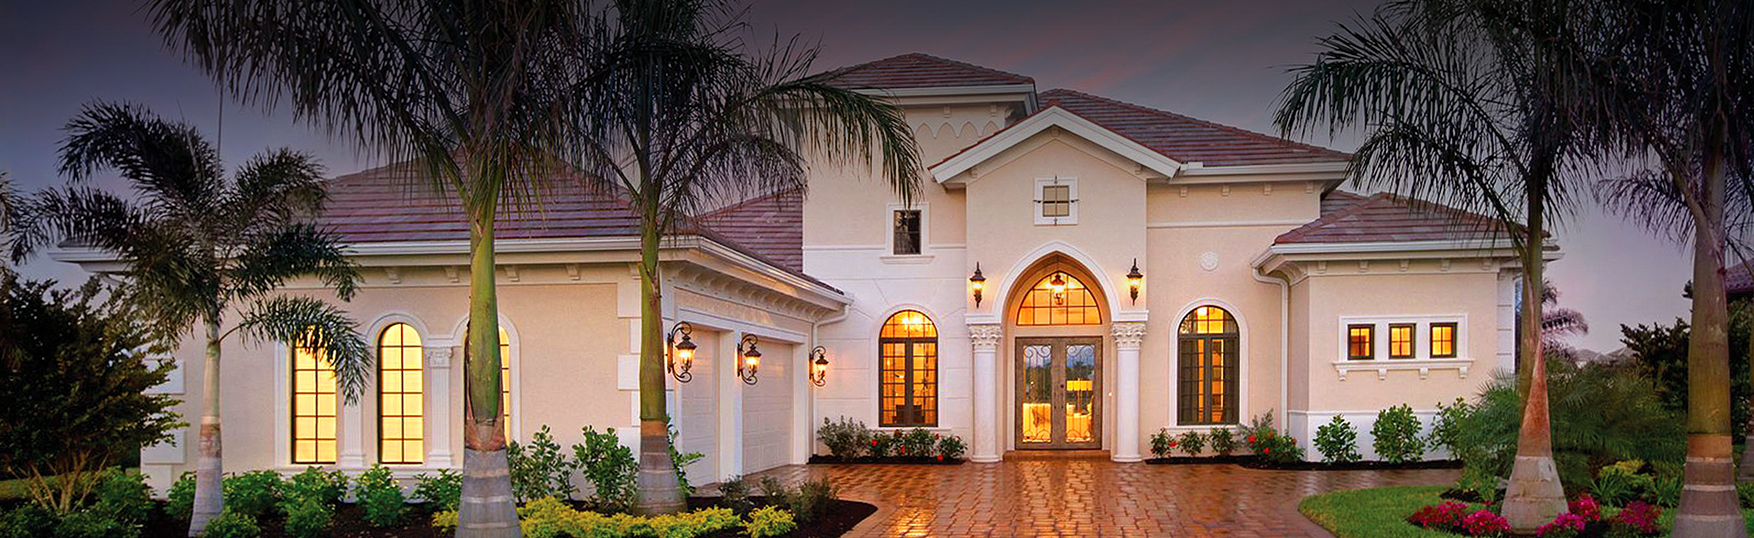 Florida Home Inspections provided by US Inspect - Serving Cental Florida